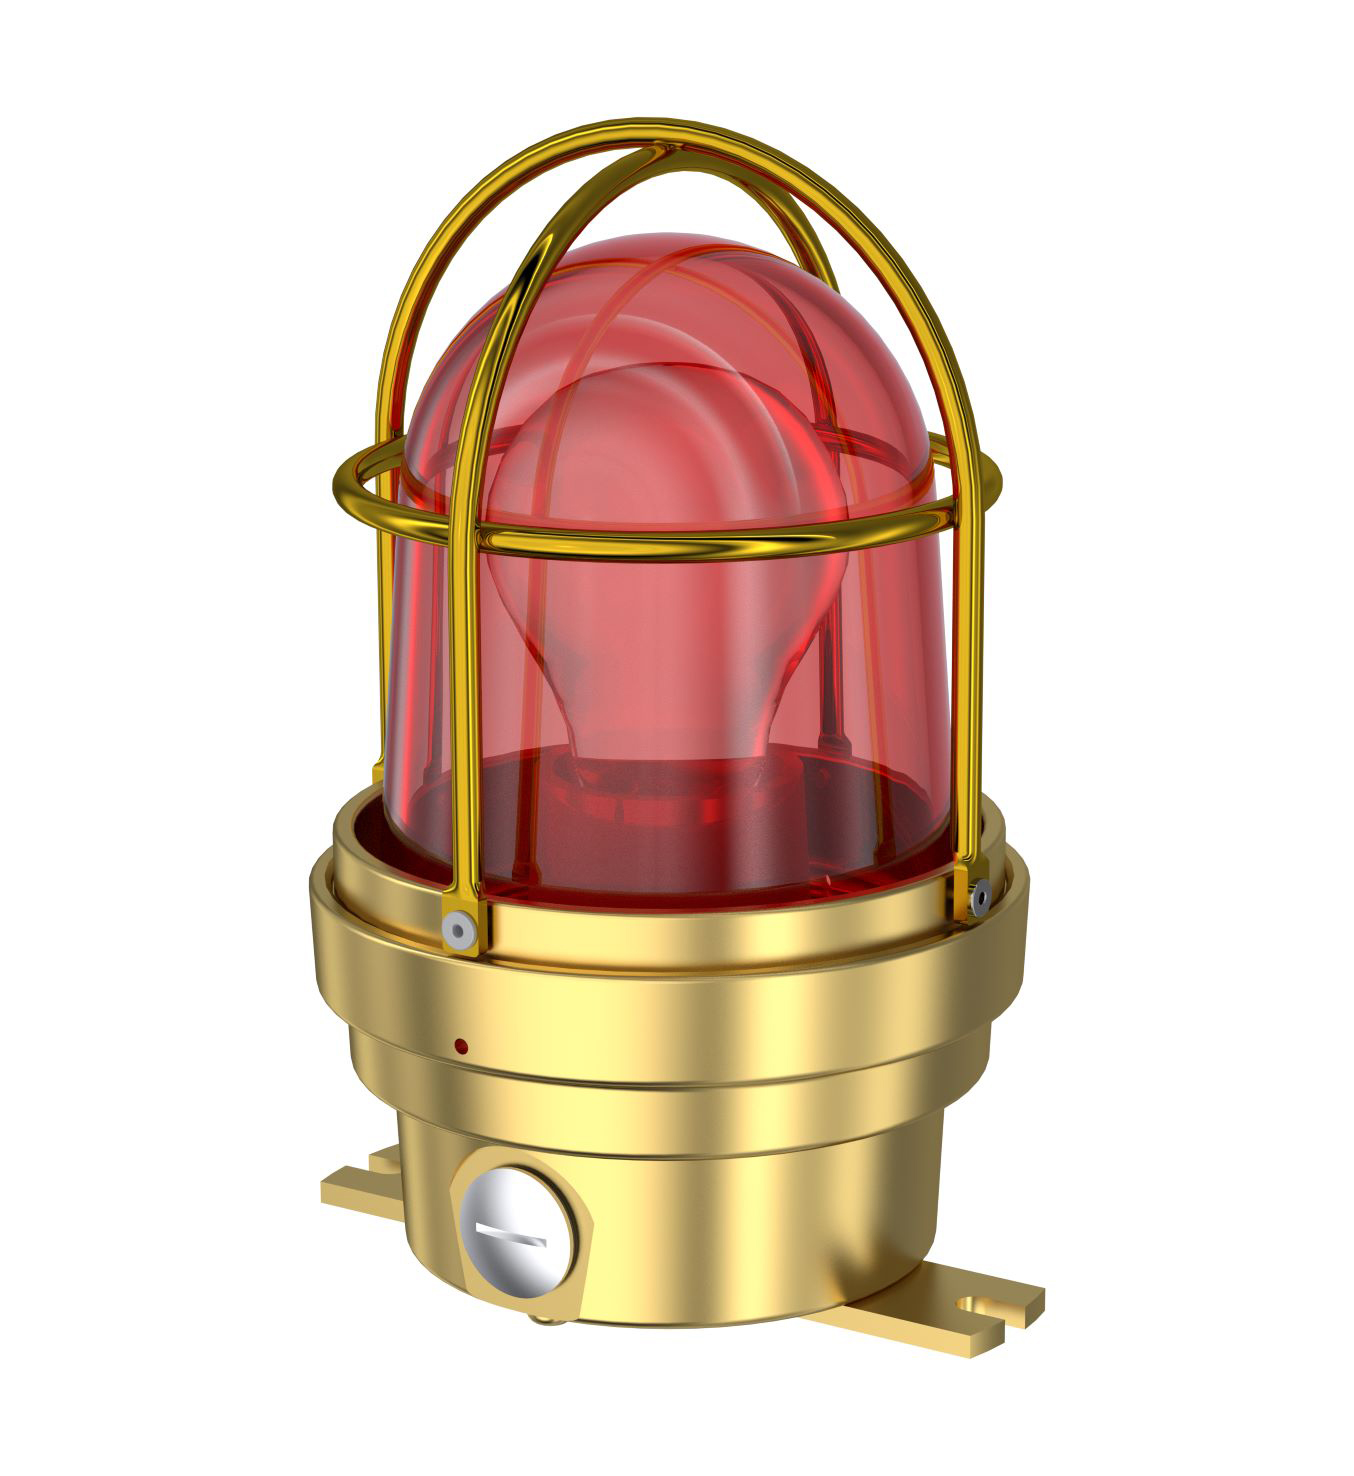 TEF 2438n Luminaire: Red Globe, For Low Energy Light Source E27, 230VAC, IP56, Brass/Polyc photo